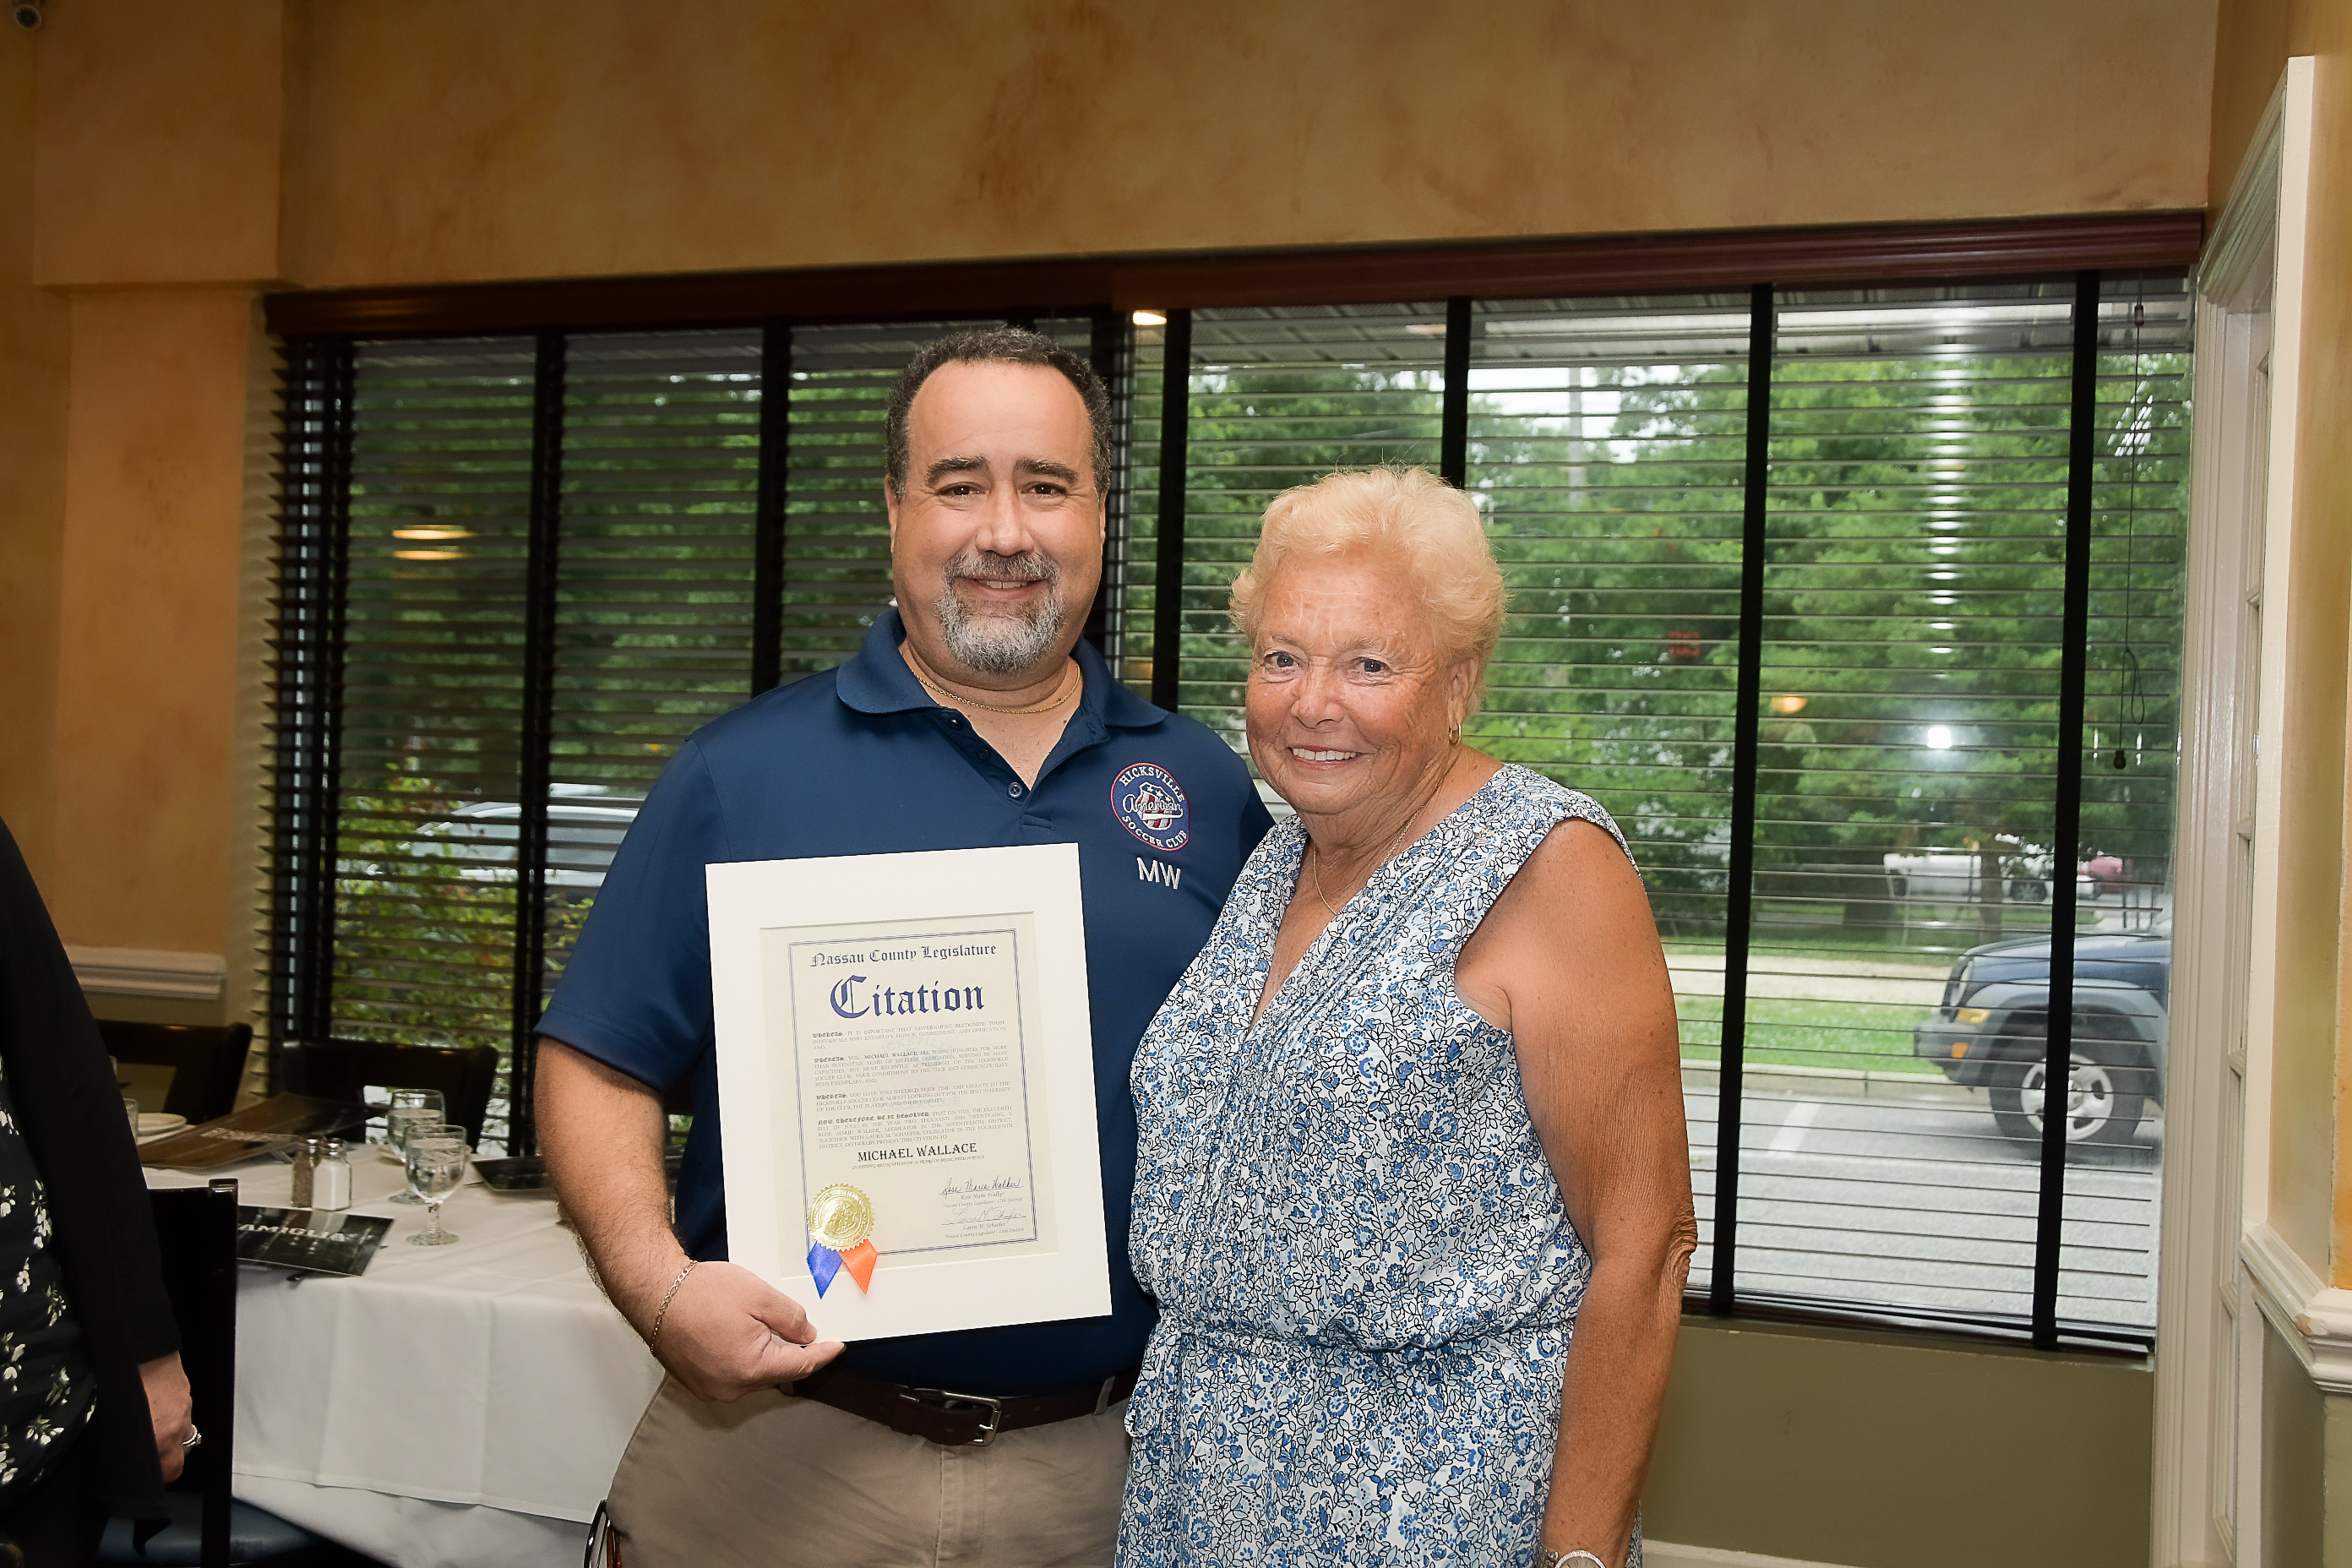 Club President Mike Wallace Honored